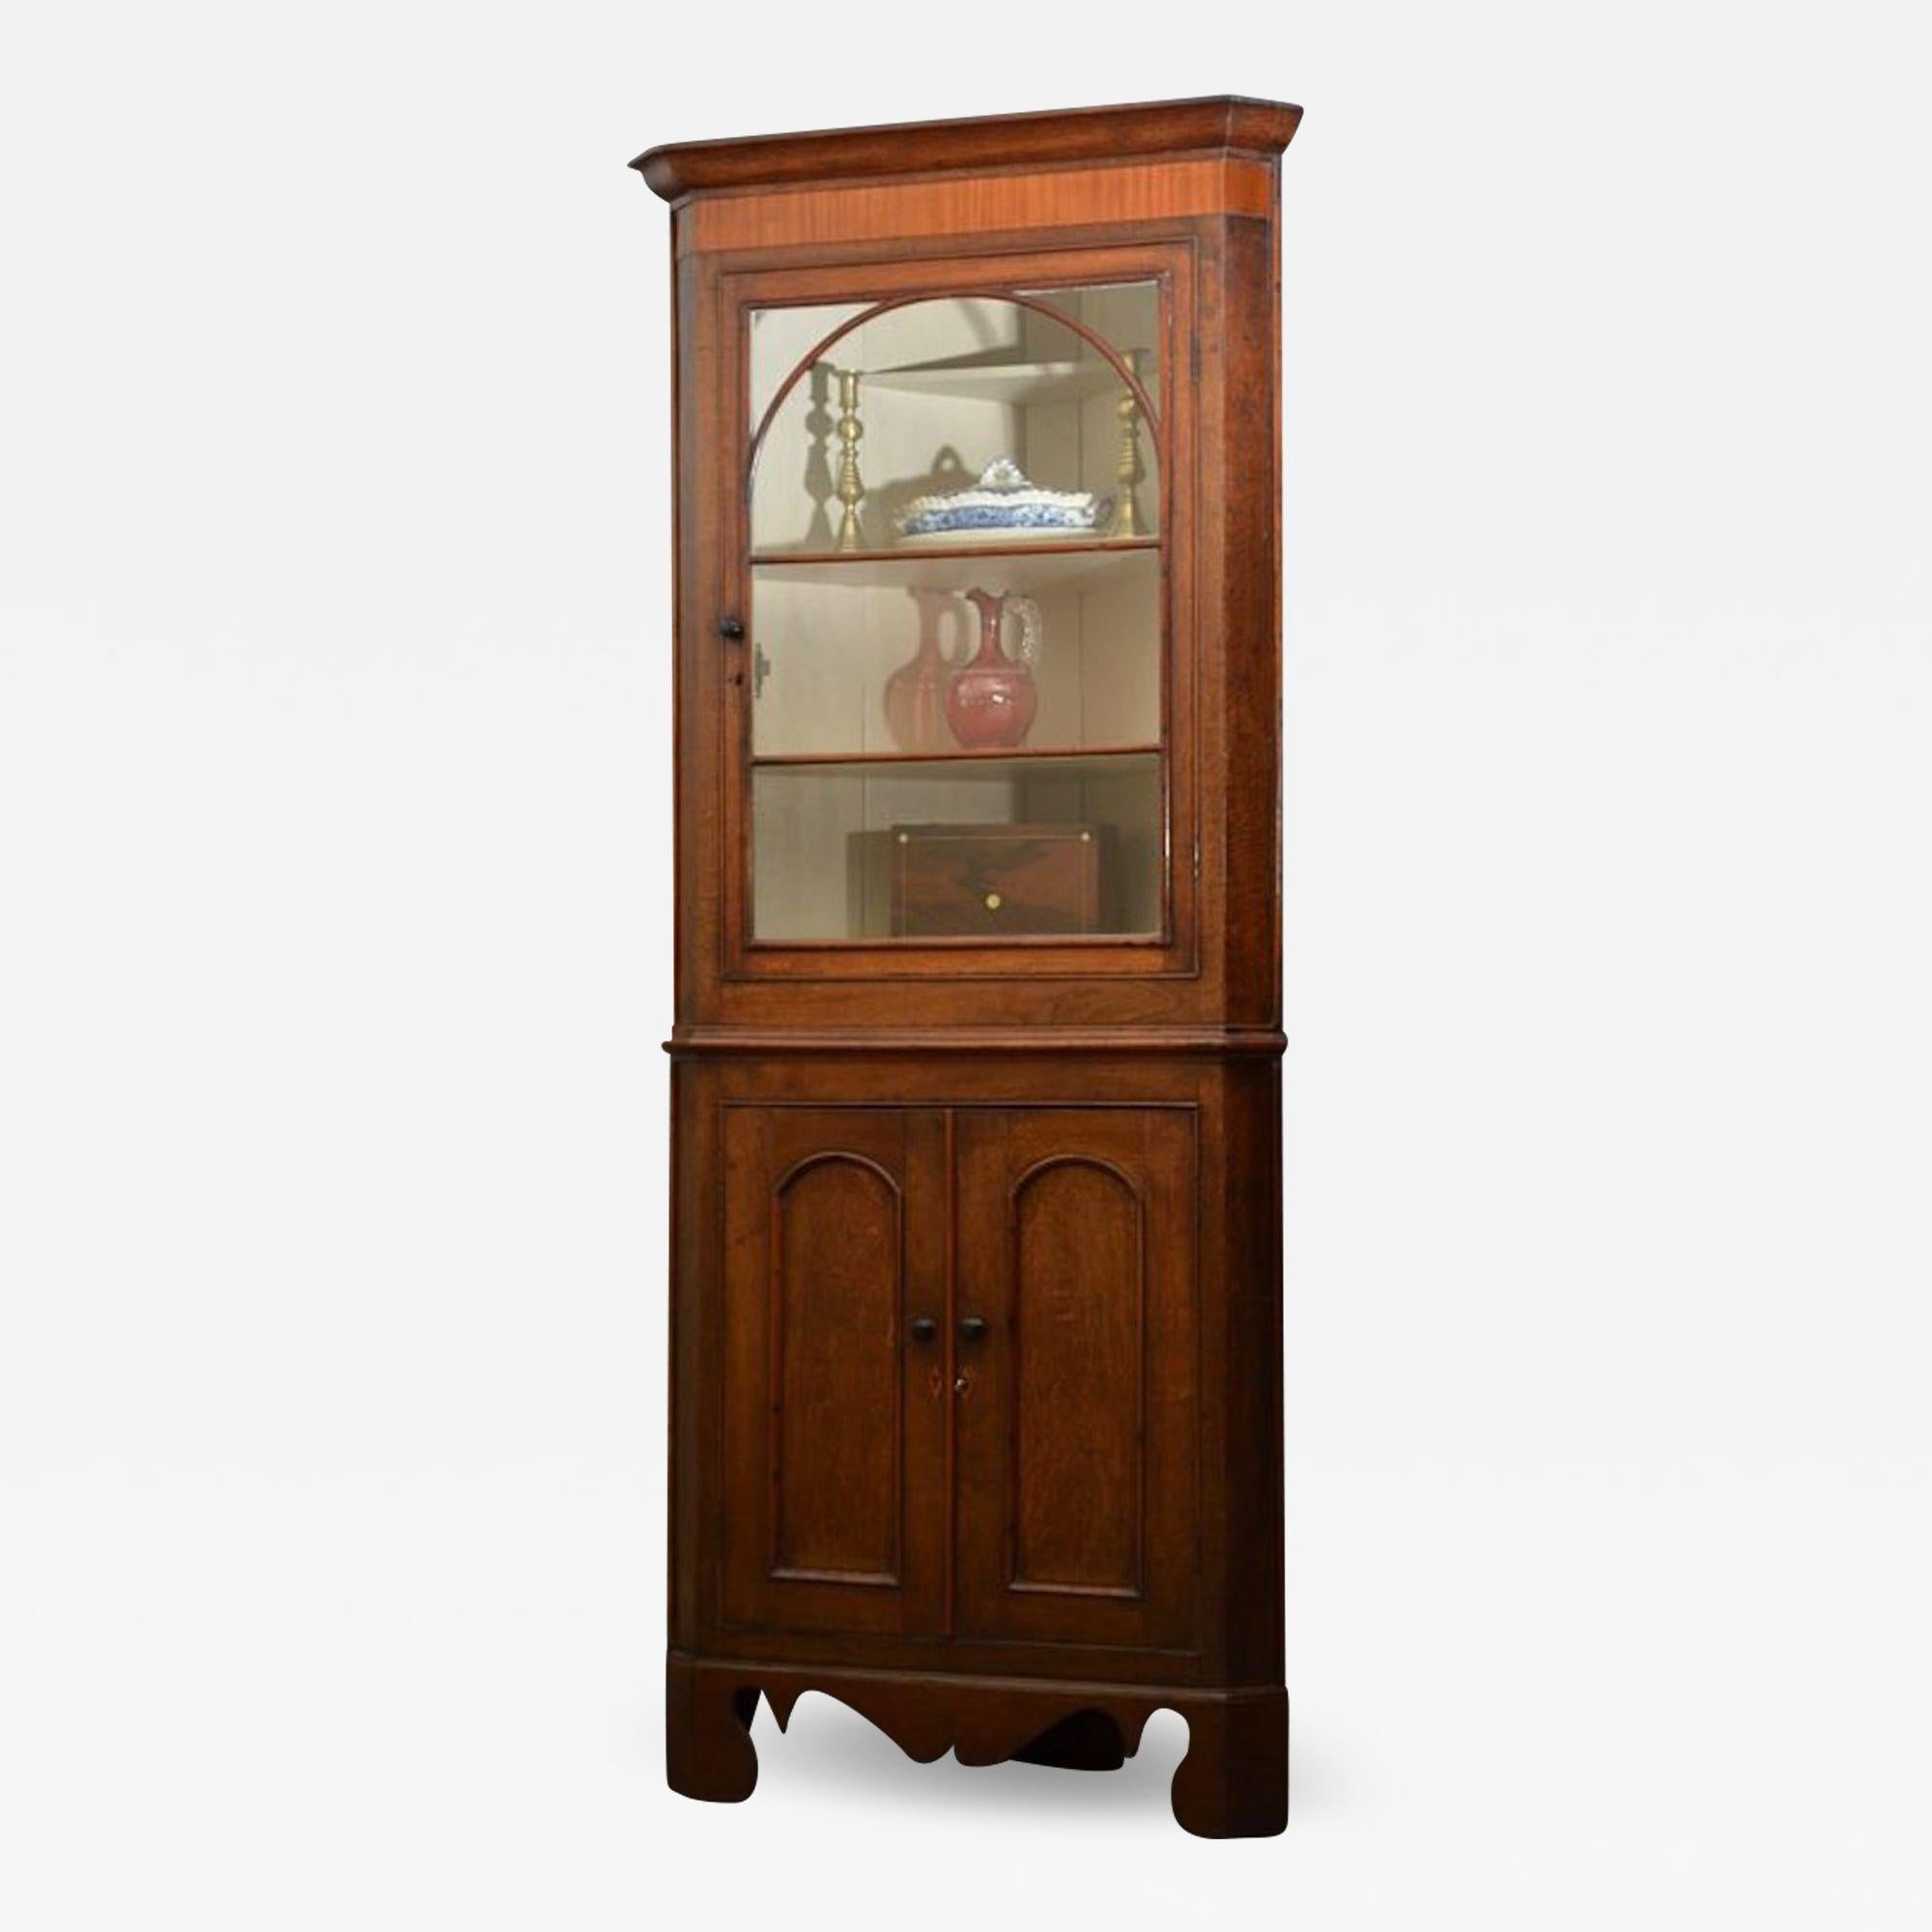 Sn736B Fine example of Georgian, oak and mahogany, freestanding corner cupboard of unusual small proportions, having moulded cornice with mahogany crossbanded frieze below, single glazed door to top section with applied arched tracery bars enclosing